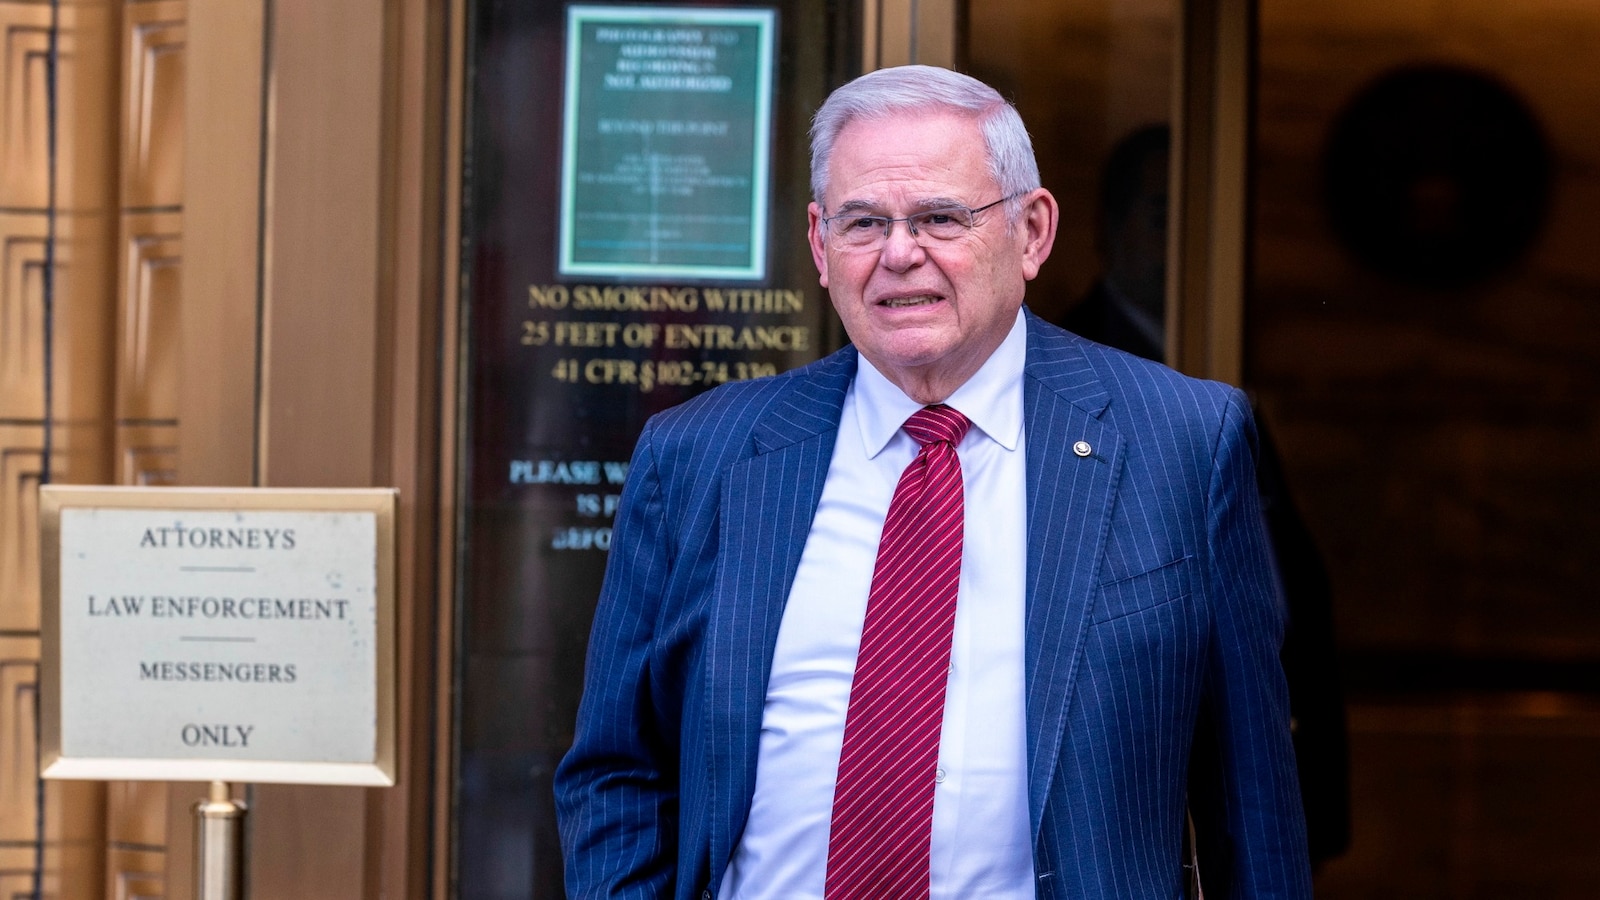 What's going on with Menendez's independent Senate bid? NJ Democrats have theories